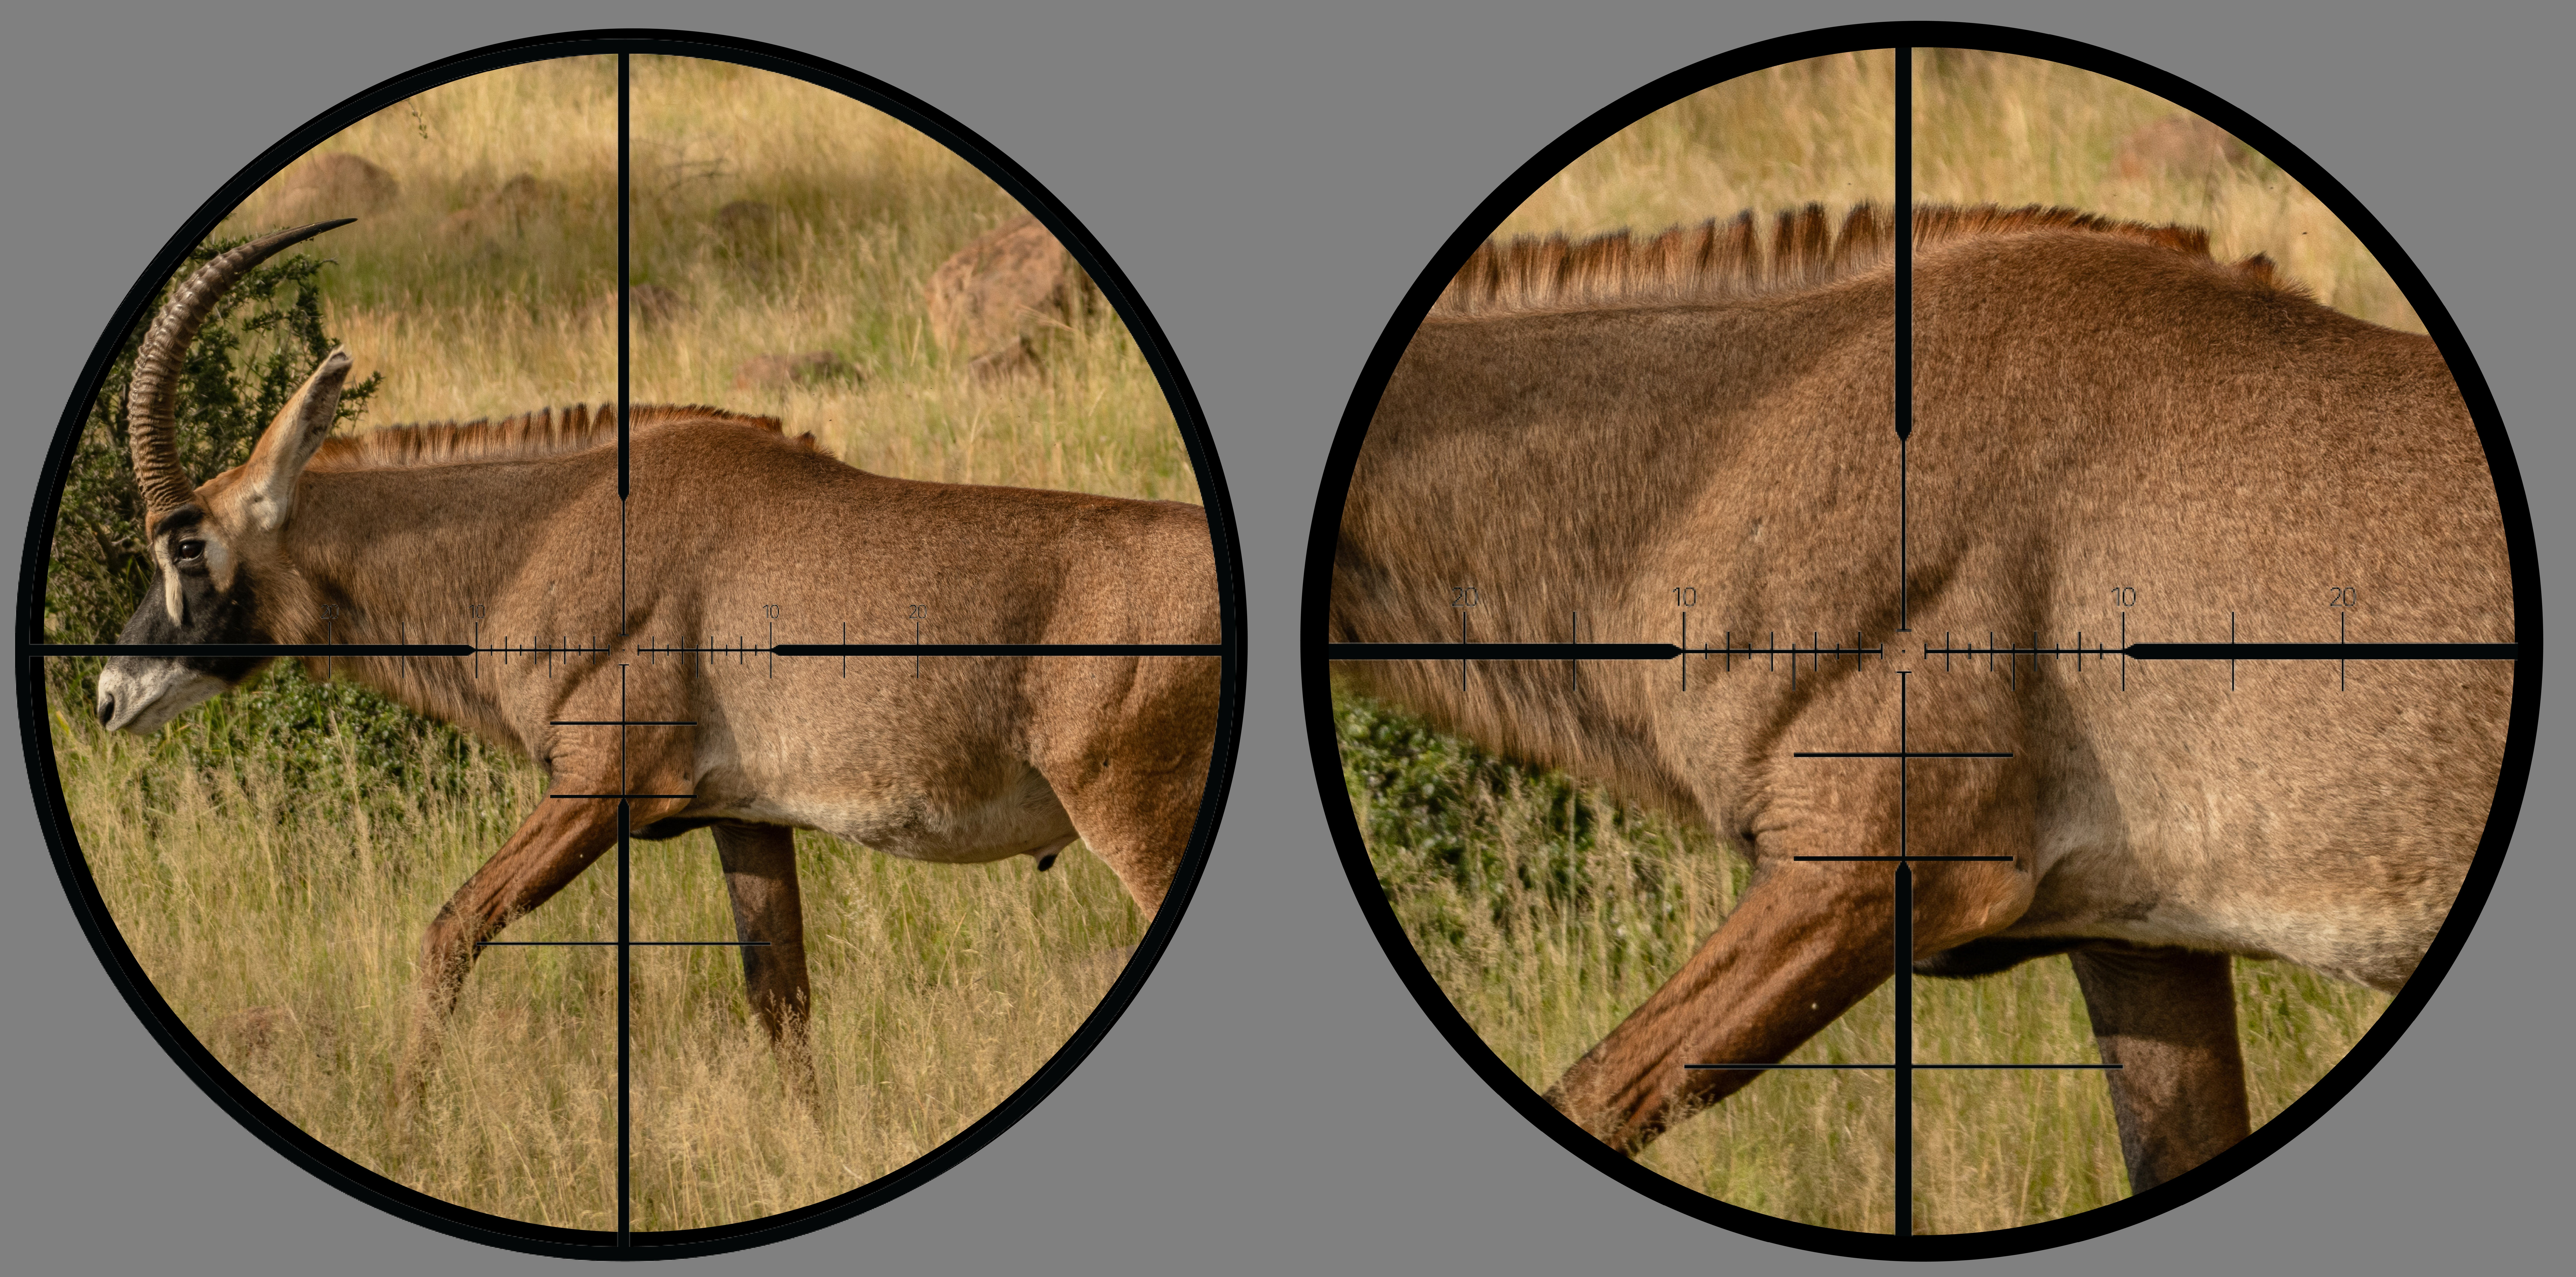 photo illustration showing a first focal plane or ffp scope reticle